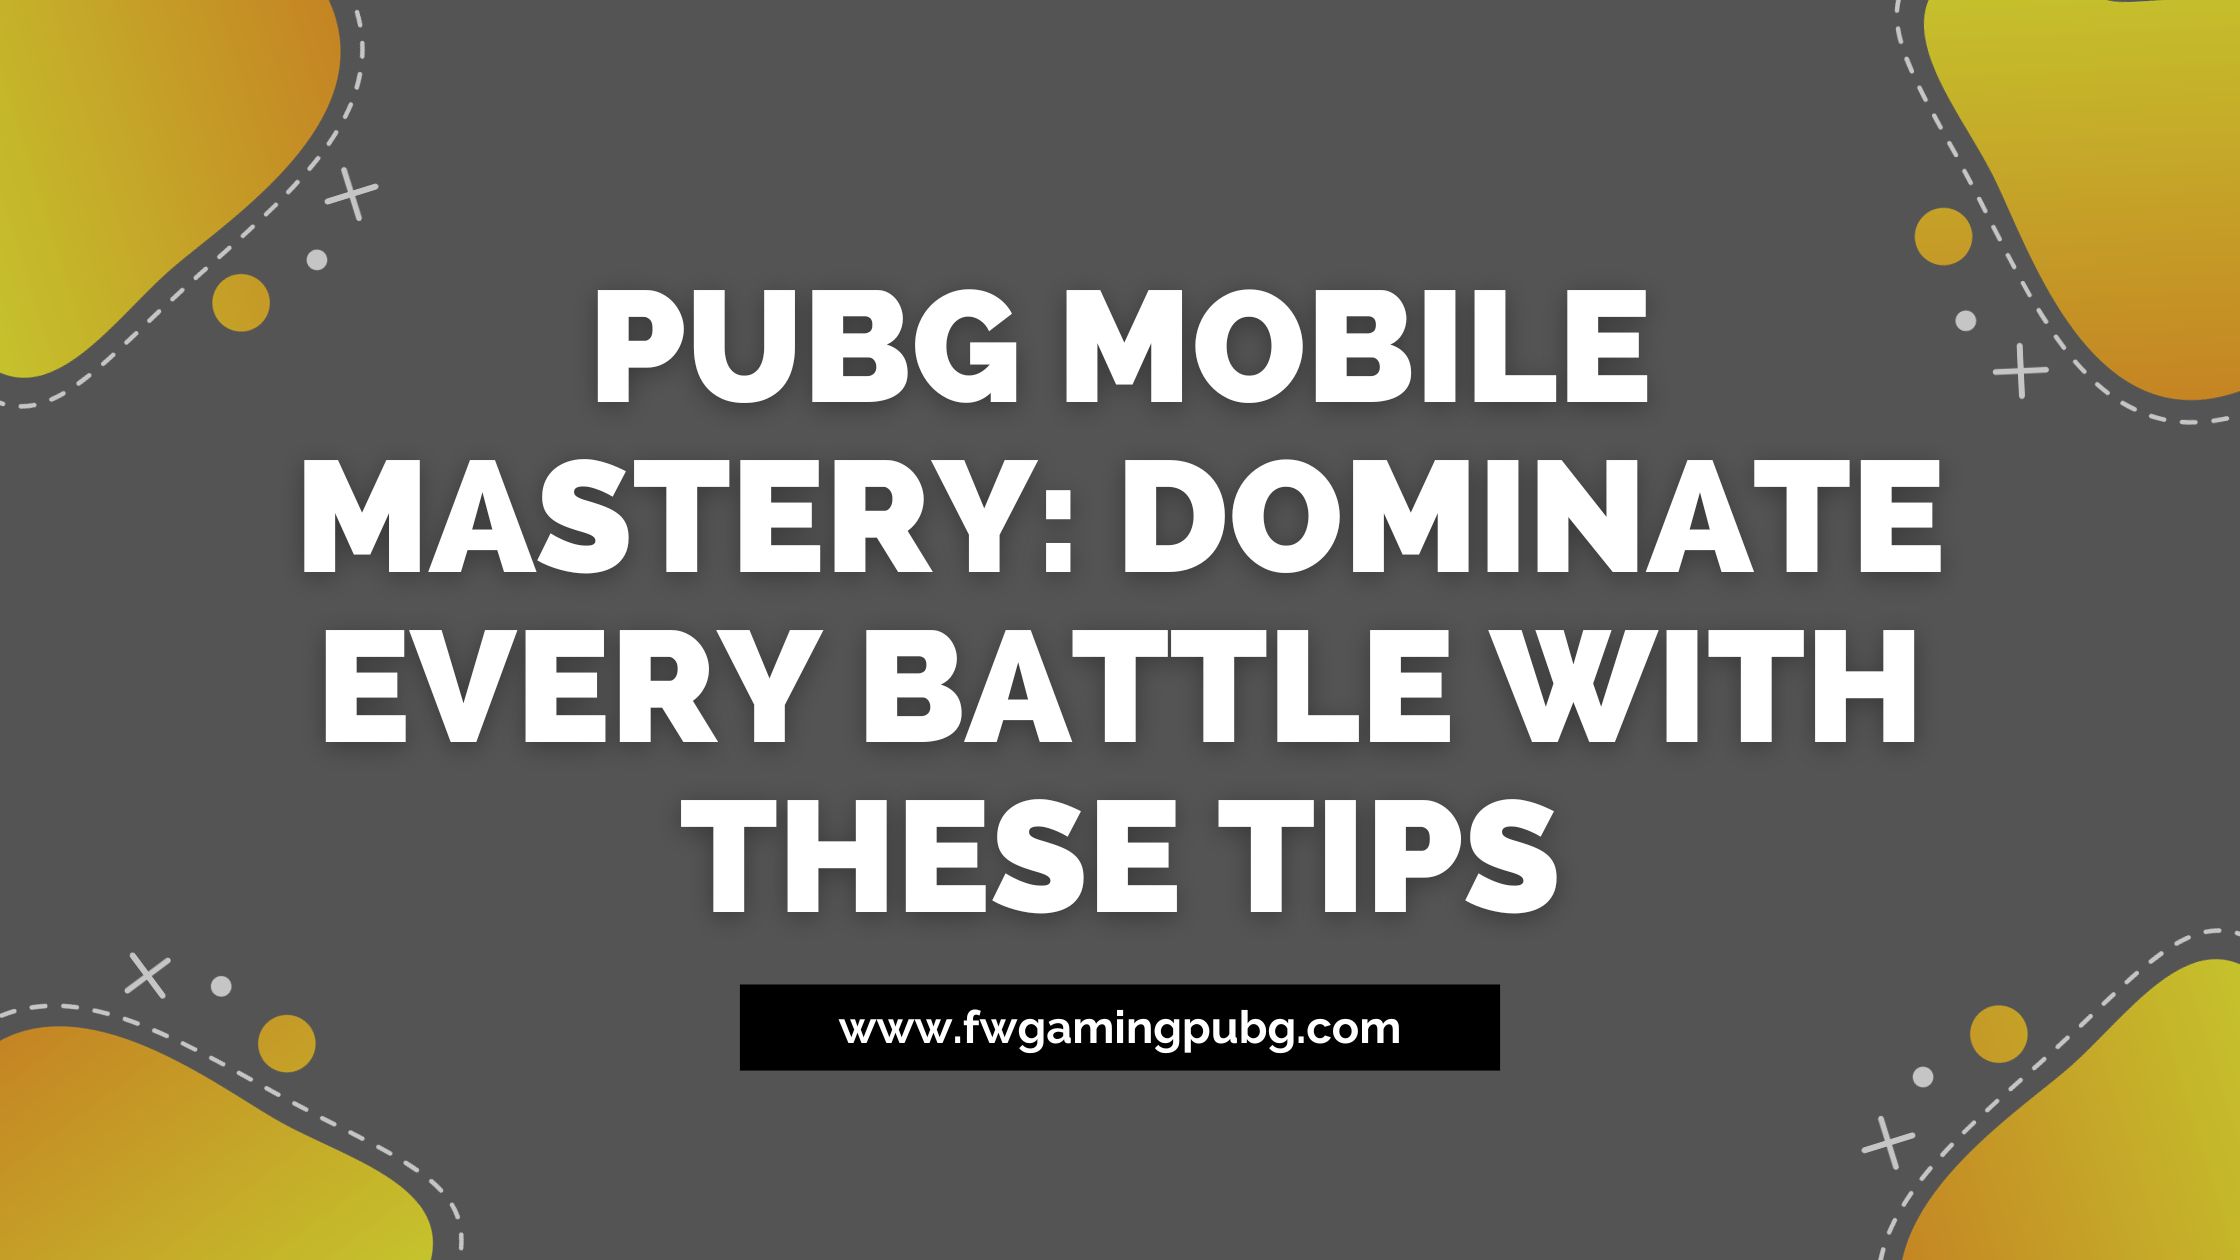 PUBG MOBILE Mastery: Dominate Every Battle With These Tips